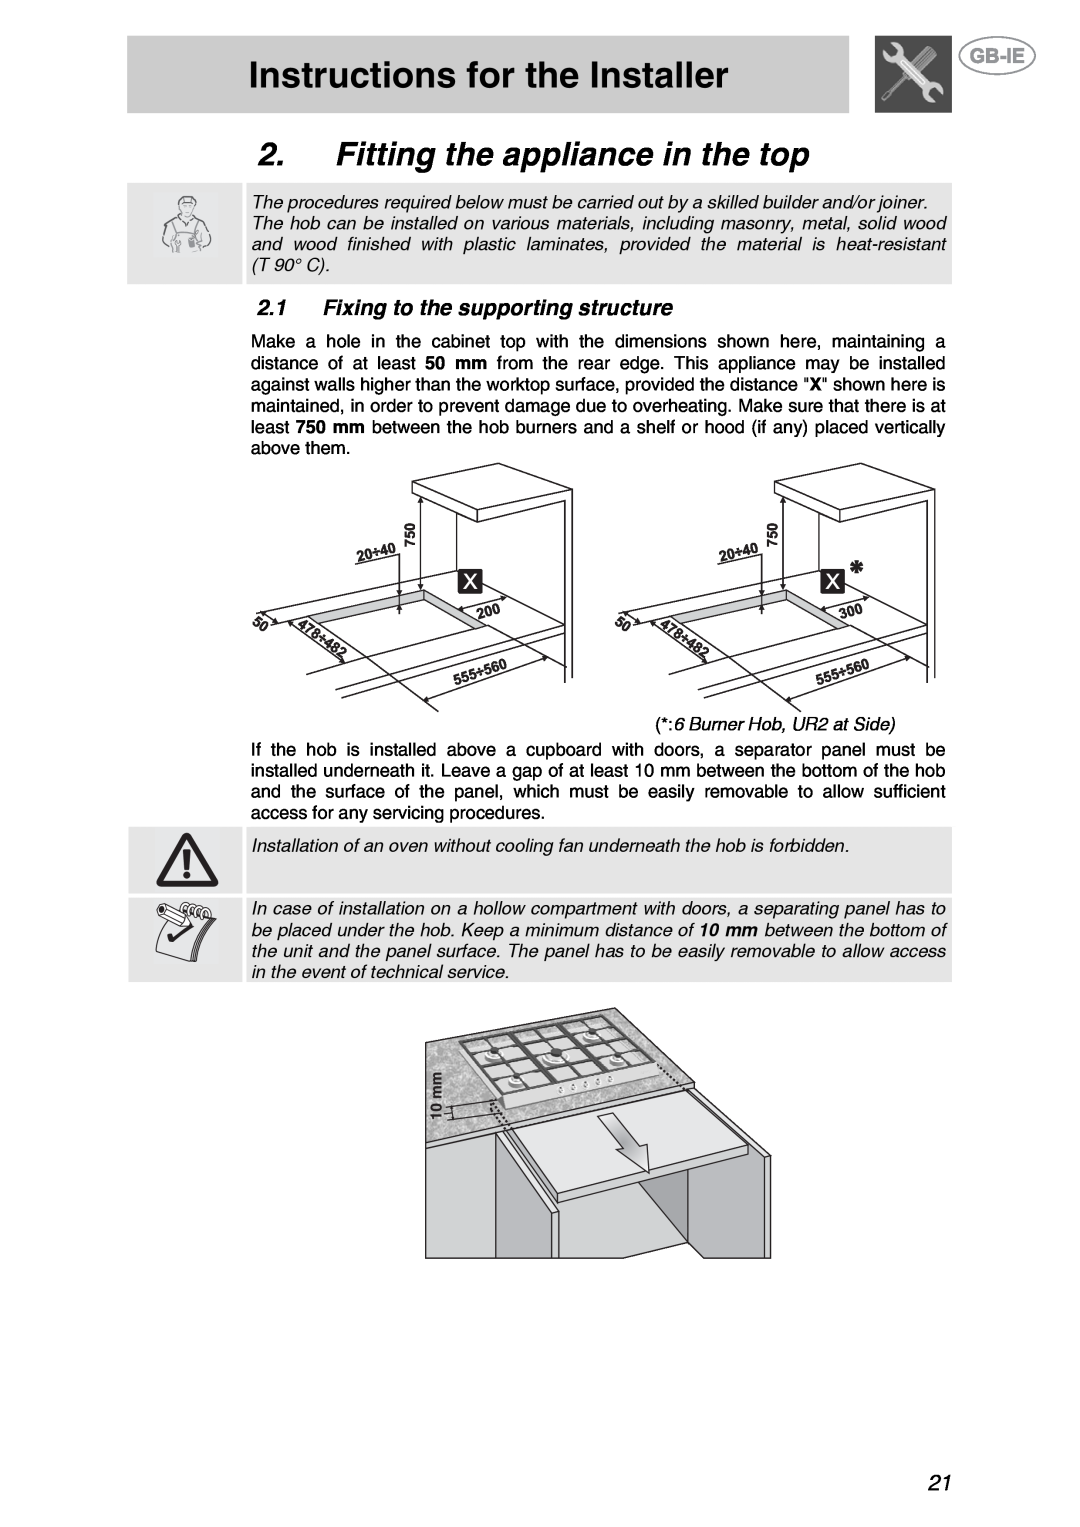 Smeg GKL64-3 manual Instructions for the Installer, Fitting the appliance in the top, 2.1Fixing to the supporting structure 